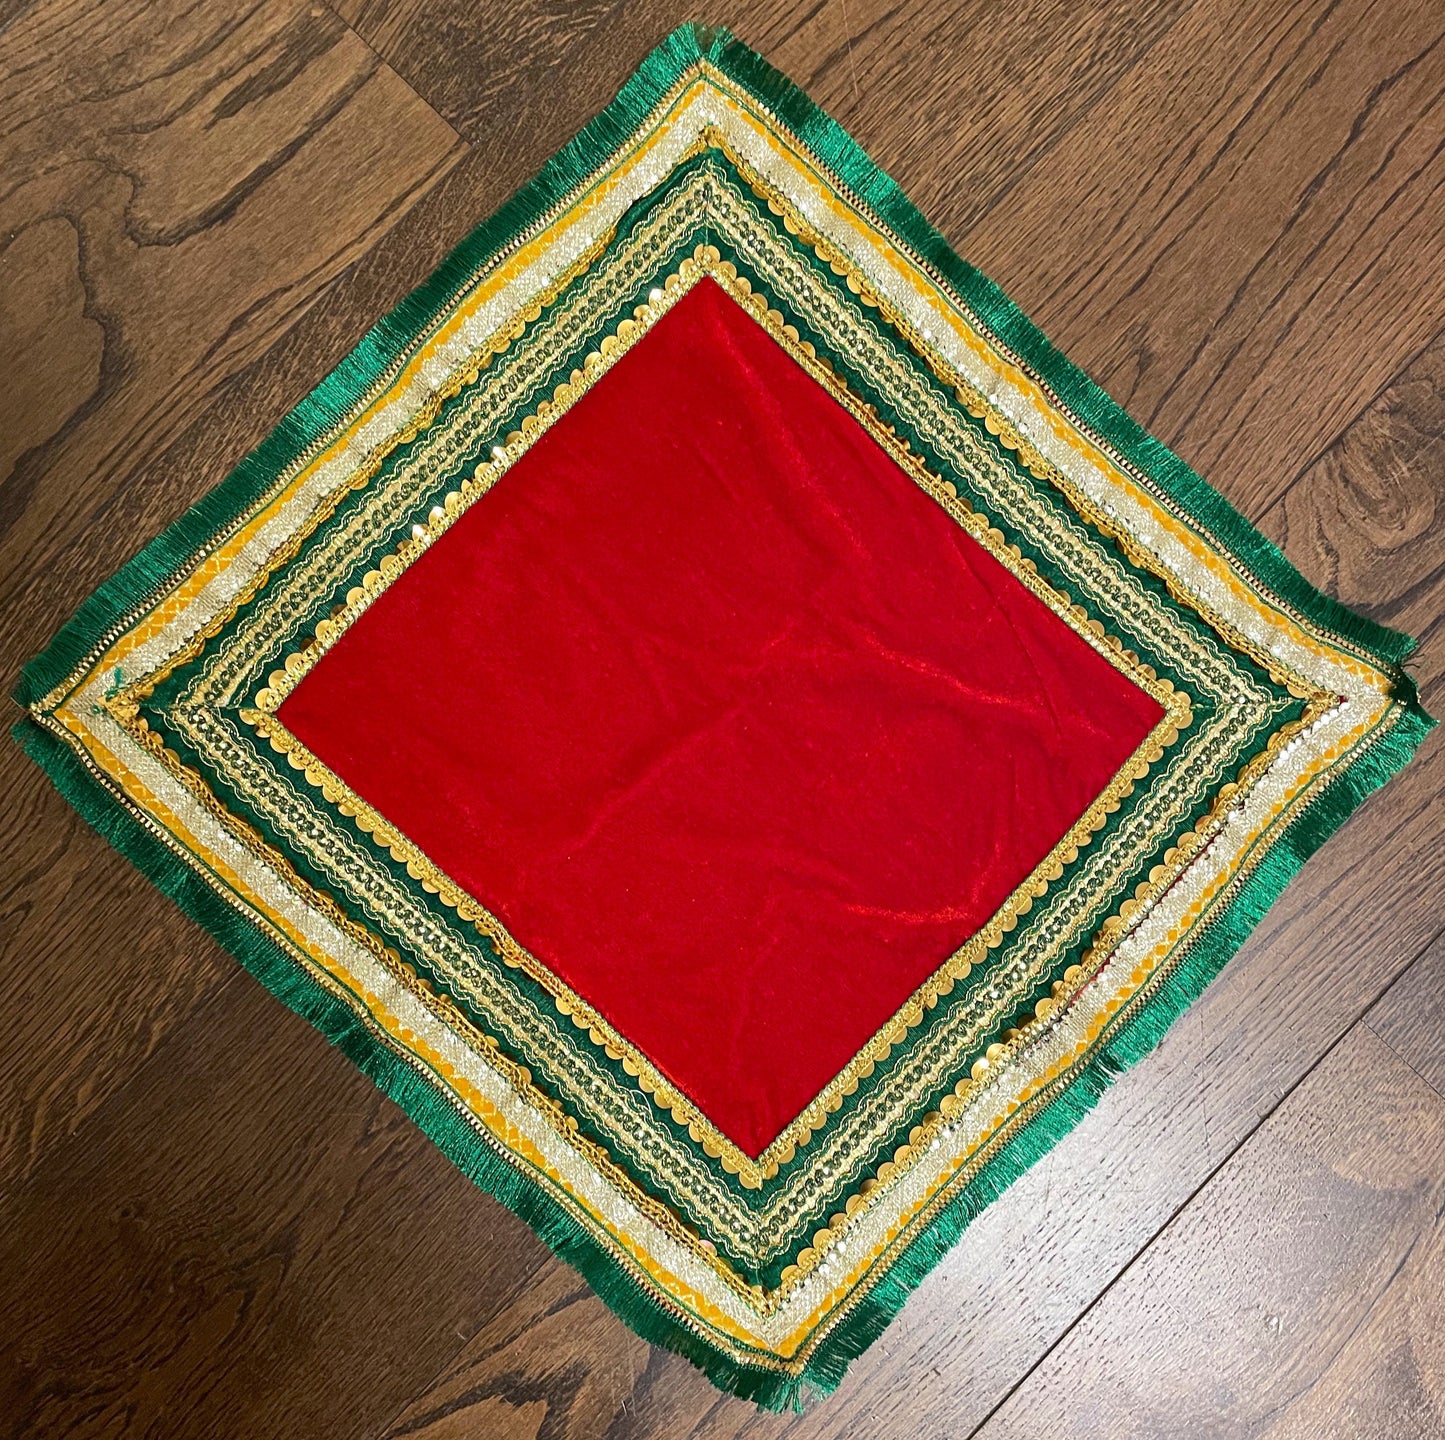 Velvet Pooja Mat Aasan Asan Decorative Cloth for Pooja Room Diwali Navratri Durga Puja Large Square Religious Red-Green and Yellow-Red